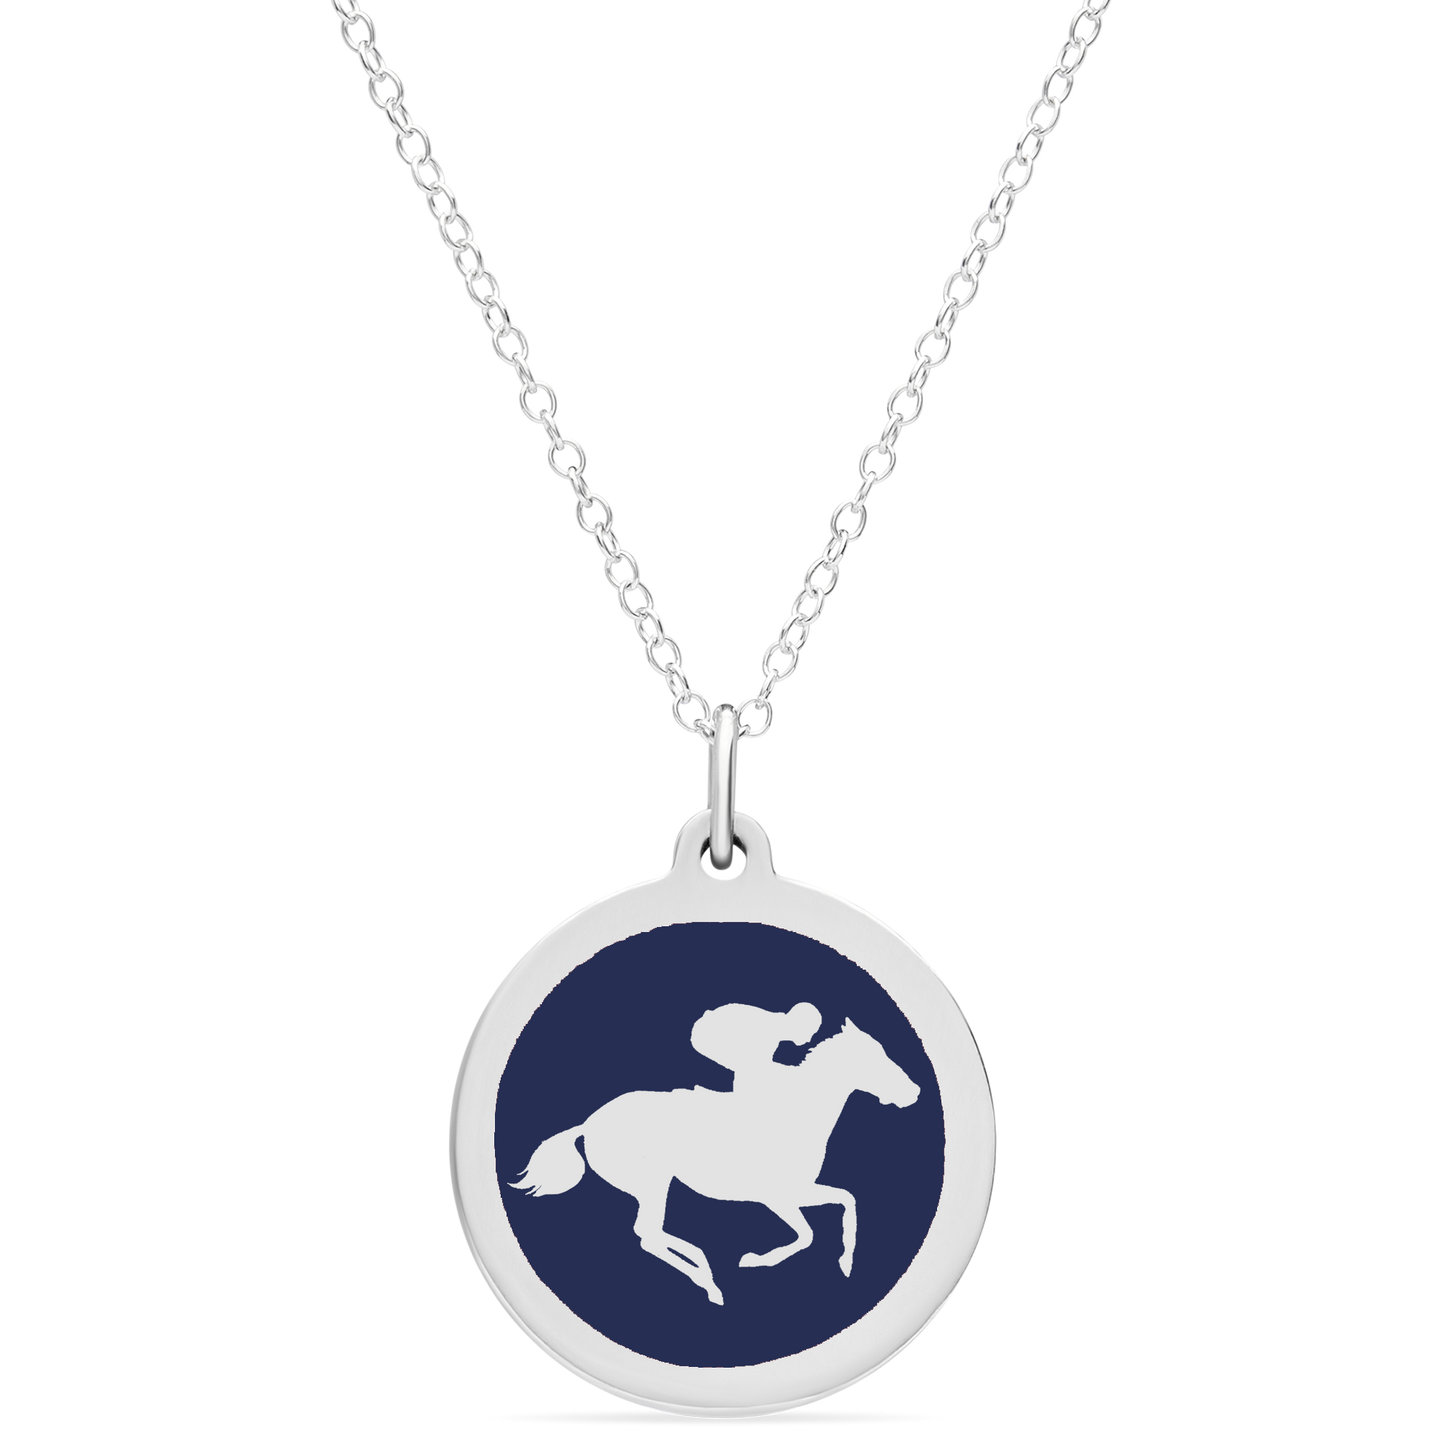 LARGE RACEHORSE CHARM sterling silver with rhodium plate